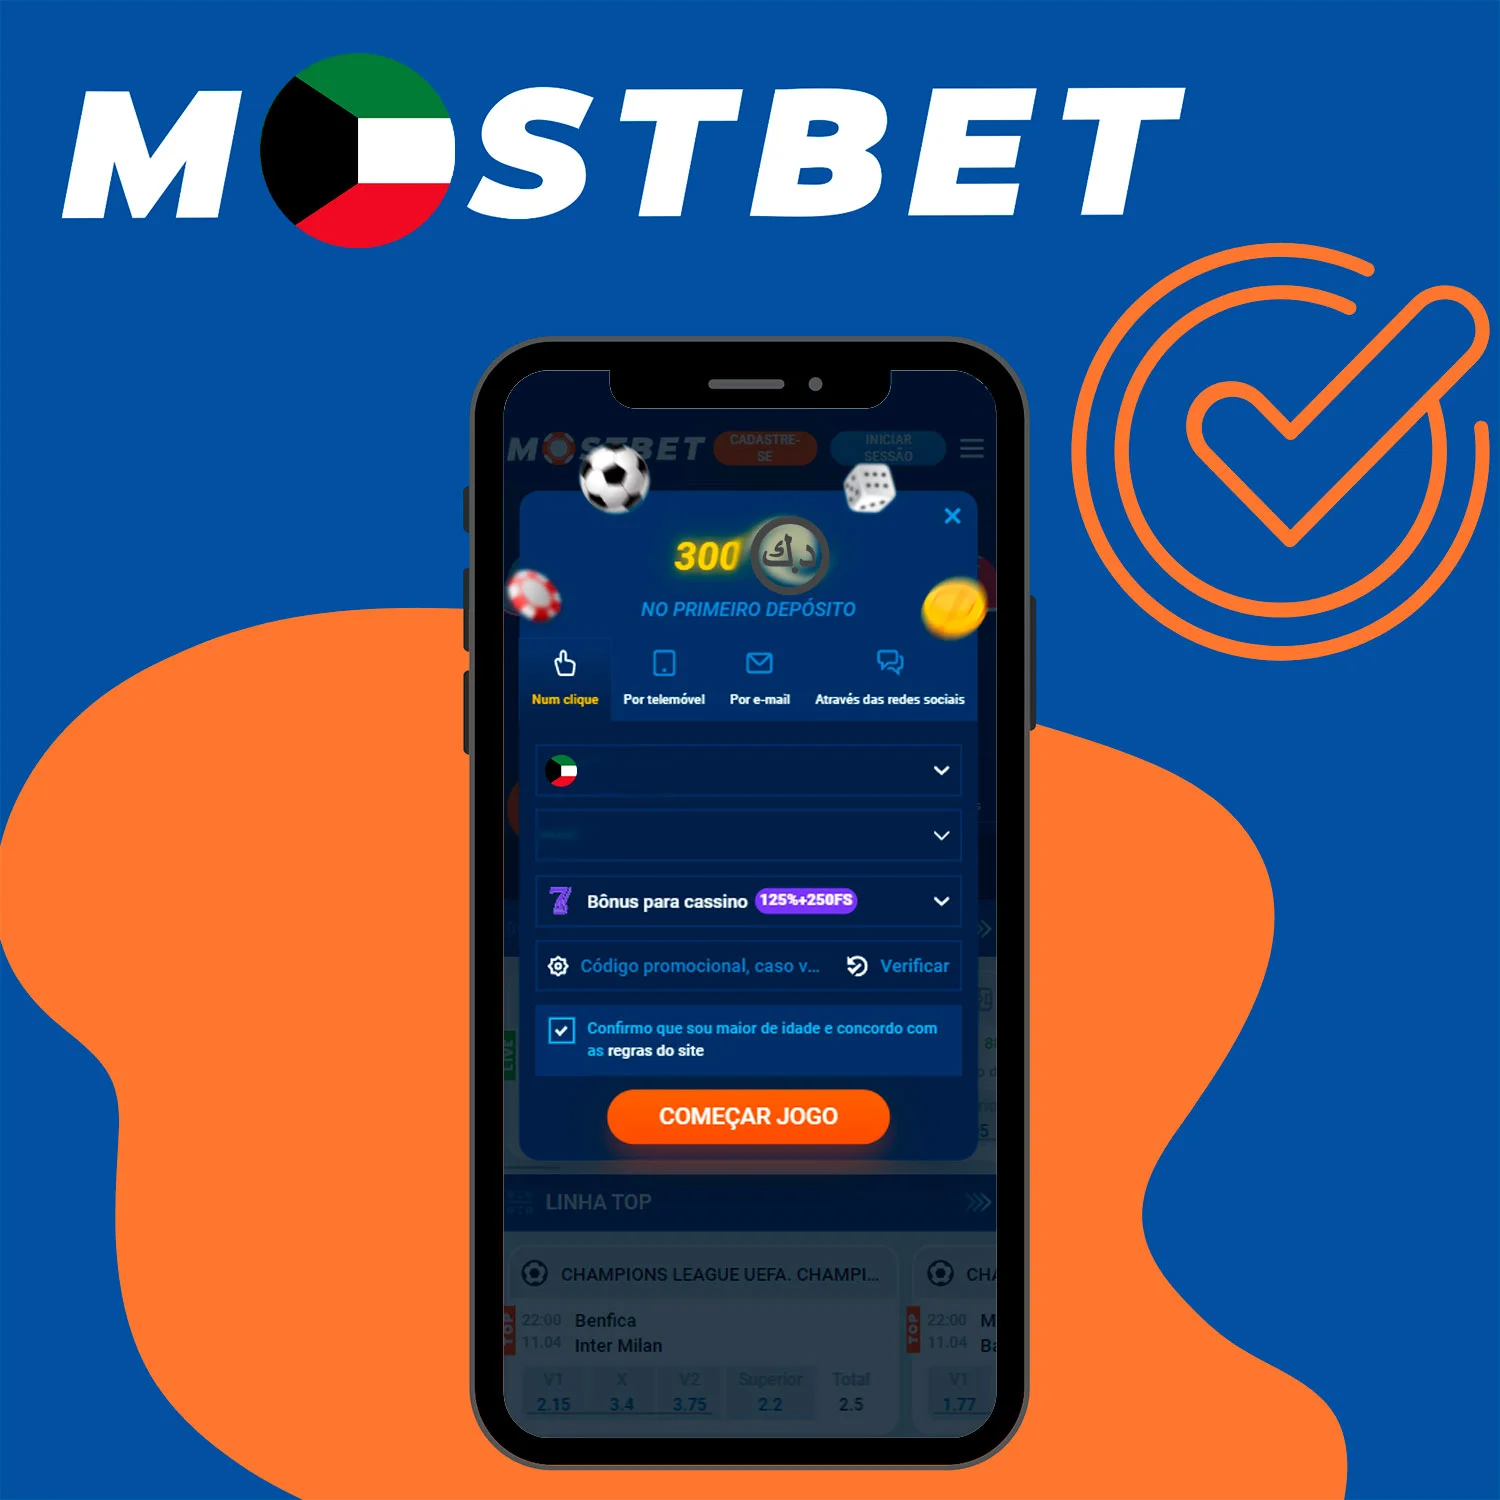 Mostbet mobile application in Germany - download and play And Other Products